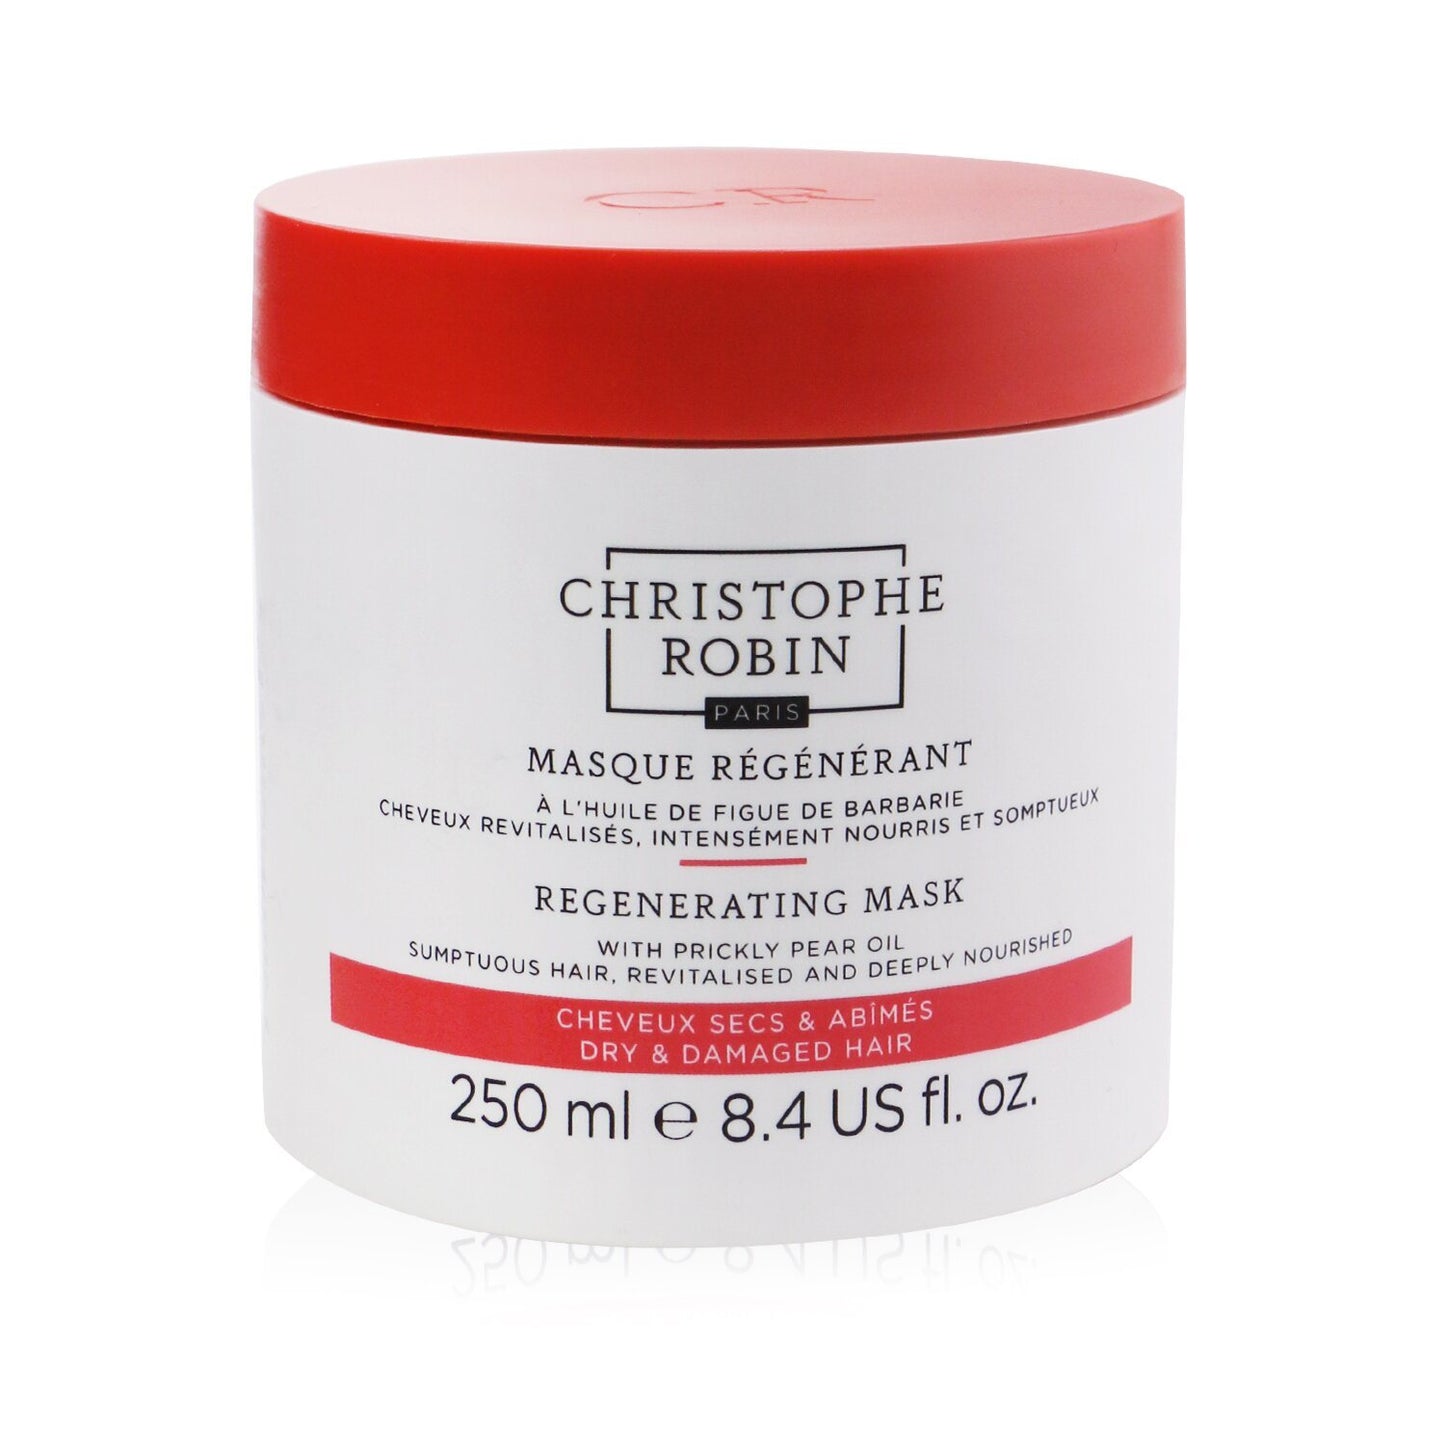 CHRISTOPHE ROBIN - Regenerating Mask with Rare Prickly Pear Oil - Dry & Damaged Hair 12635435/590524 250ml/8.4oz